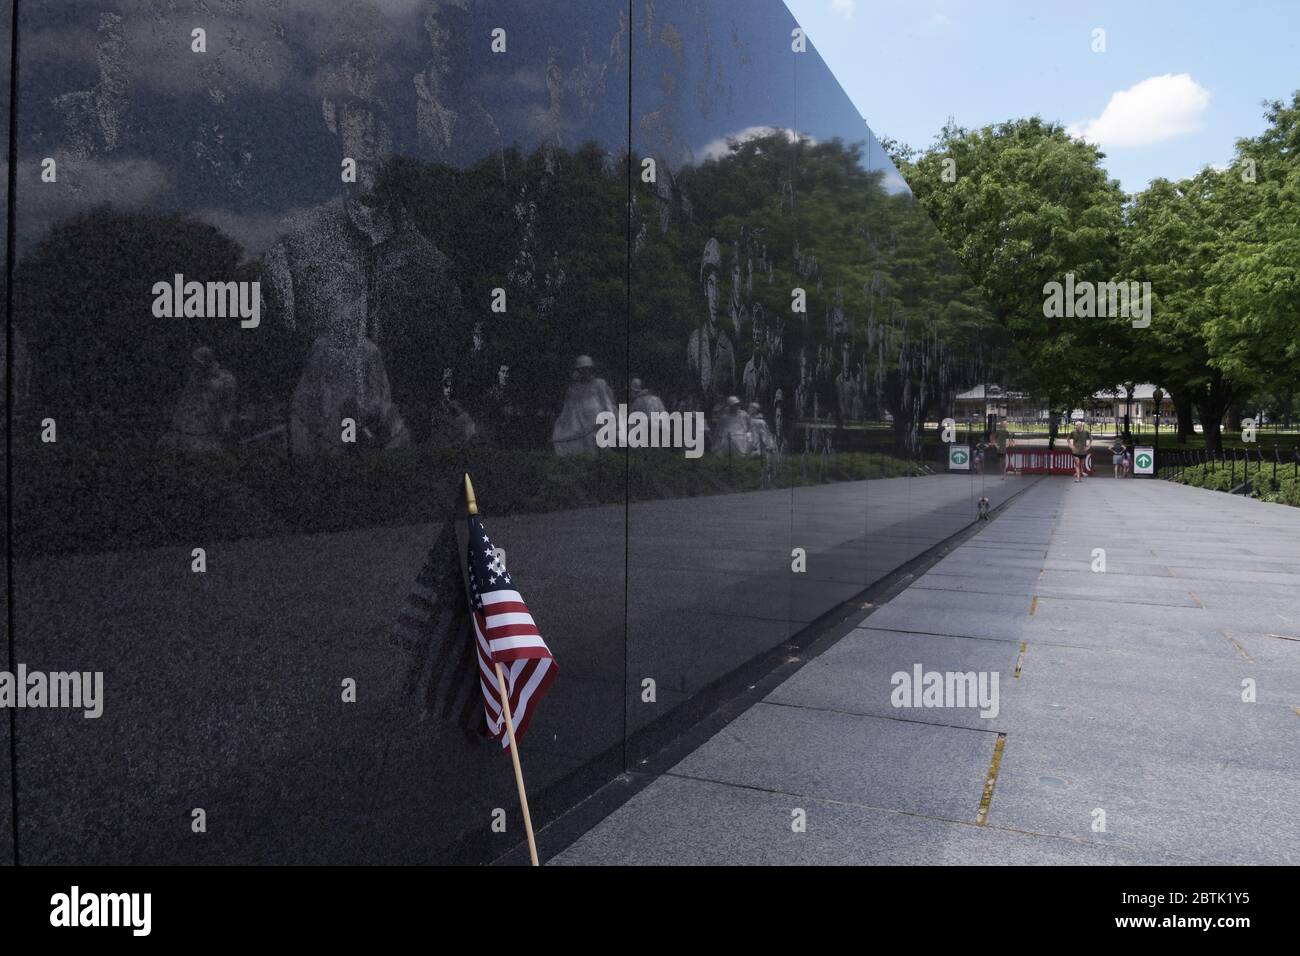 Washington, USA. 26th May, 2020. US citizen visit Korea War monument and pay honor to soldiers who died in the war, during the Memorial Day today on May 26, 2020 in Washington DC, USA. Memorial Day Parade was canceled due to the Coronavirus 19 pandemic. (Photo by Lenin Nolly/Sipa USA) Credit: Sipa USA/Alamy Live News Stock Photo